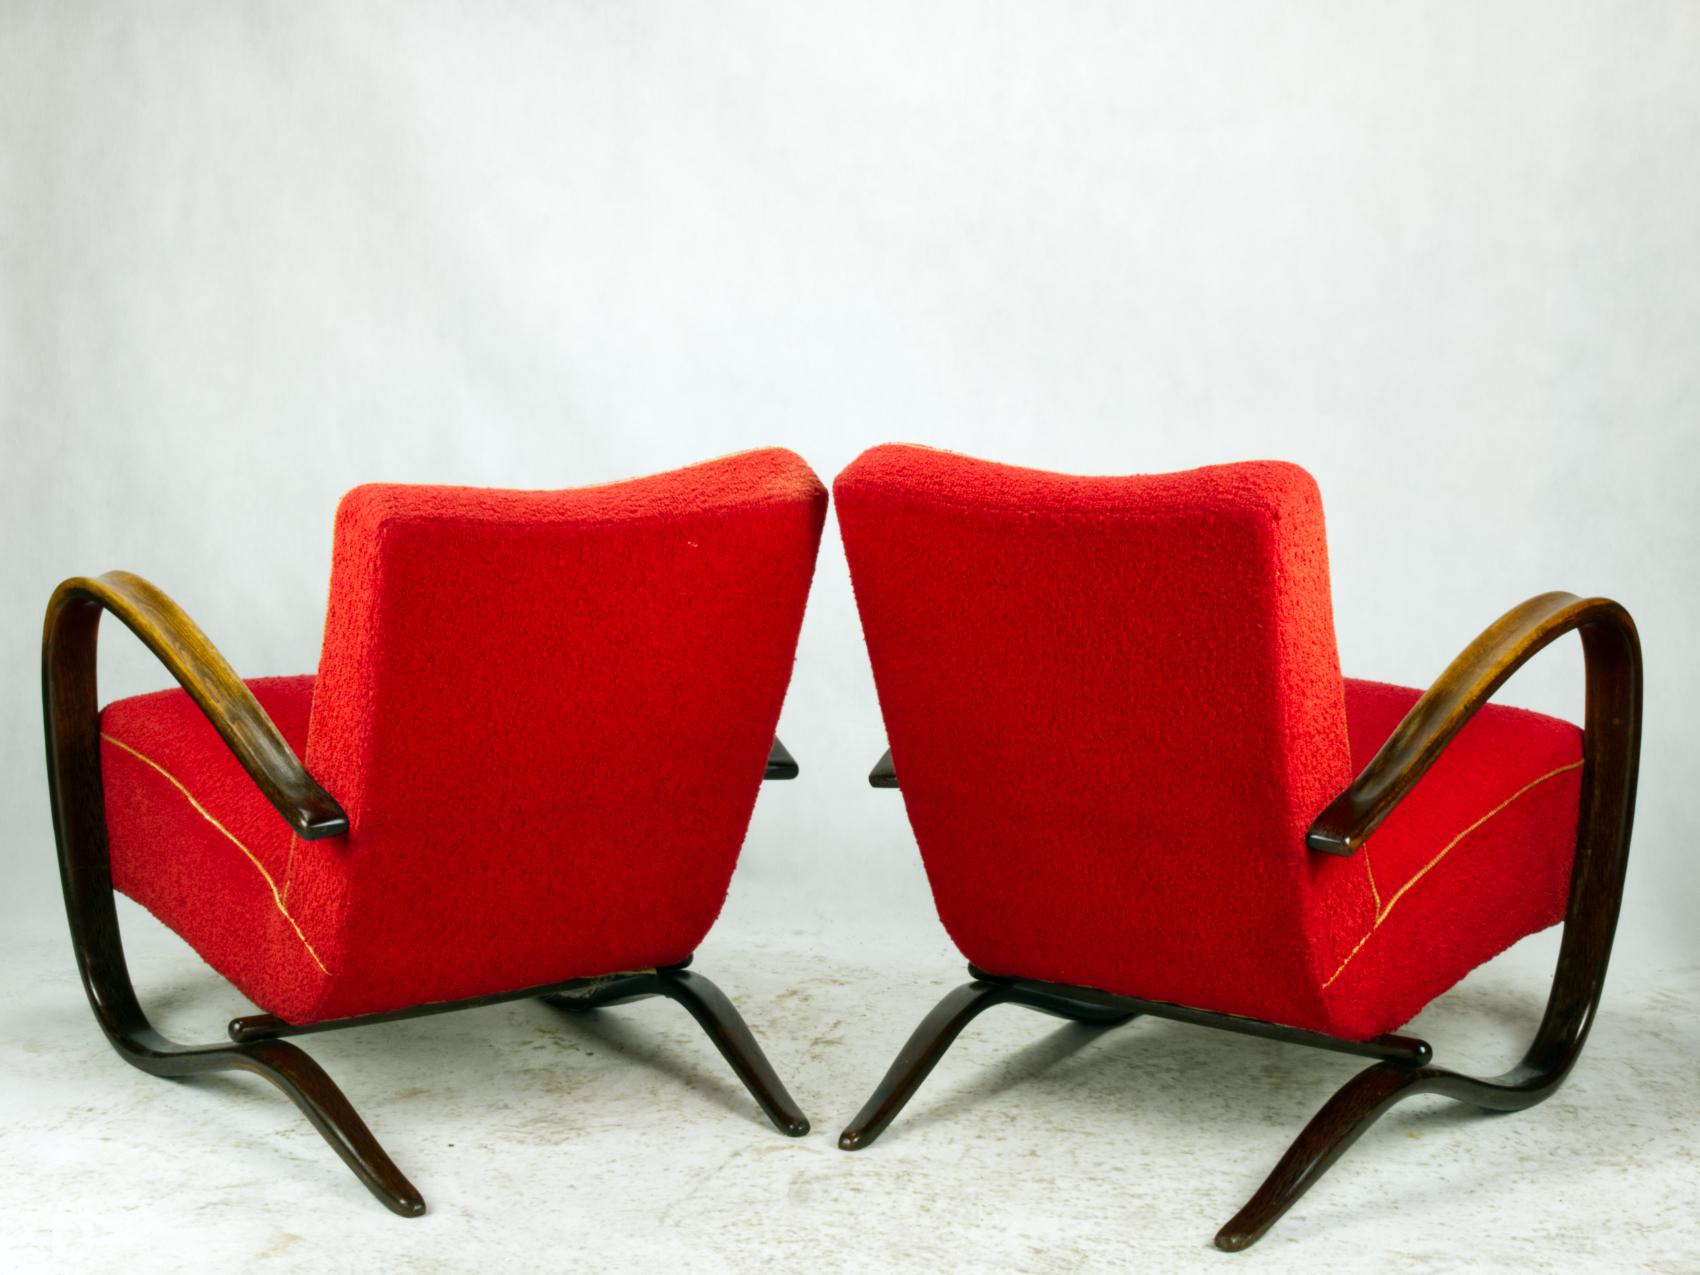 Czech Pair of H269 Lounge Chairs by Jindřich Halabala for Up Závody Brno, 1930s